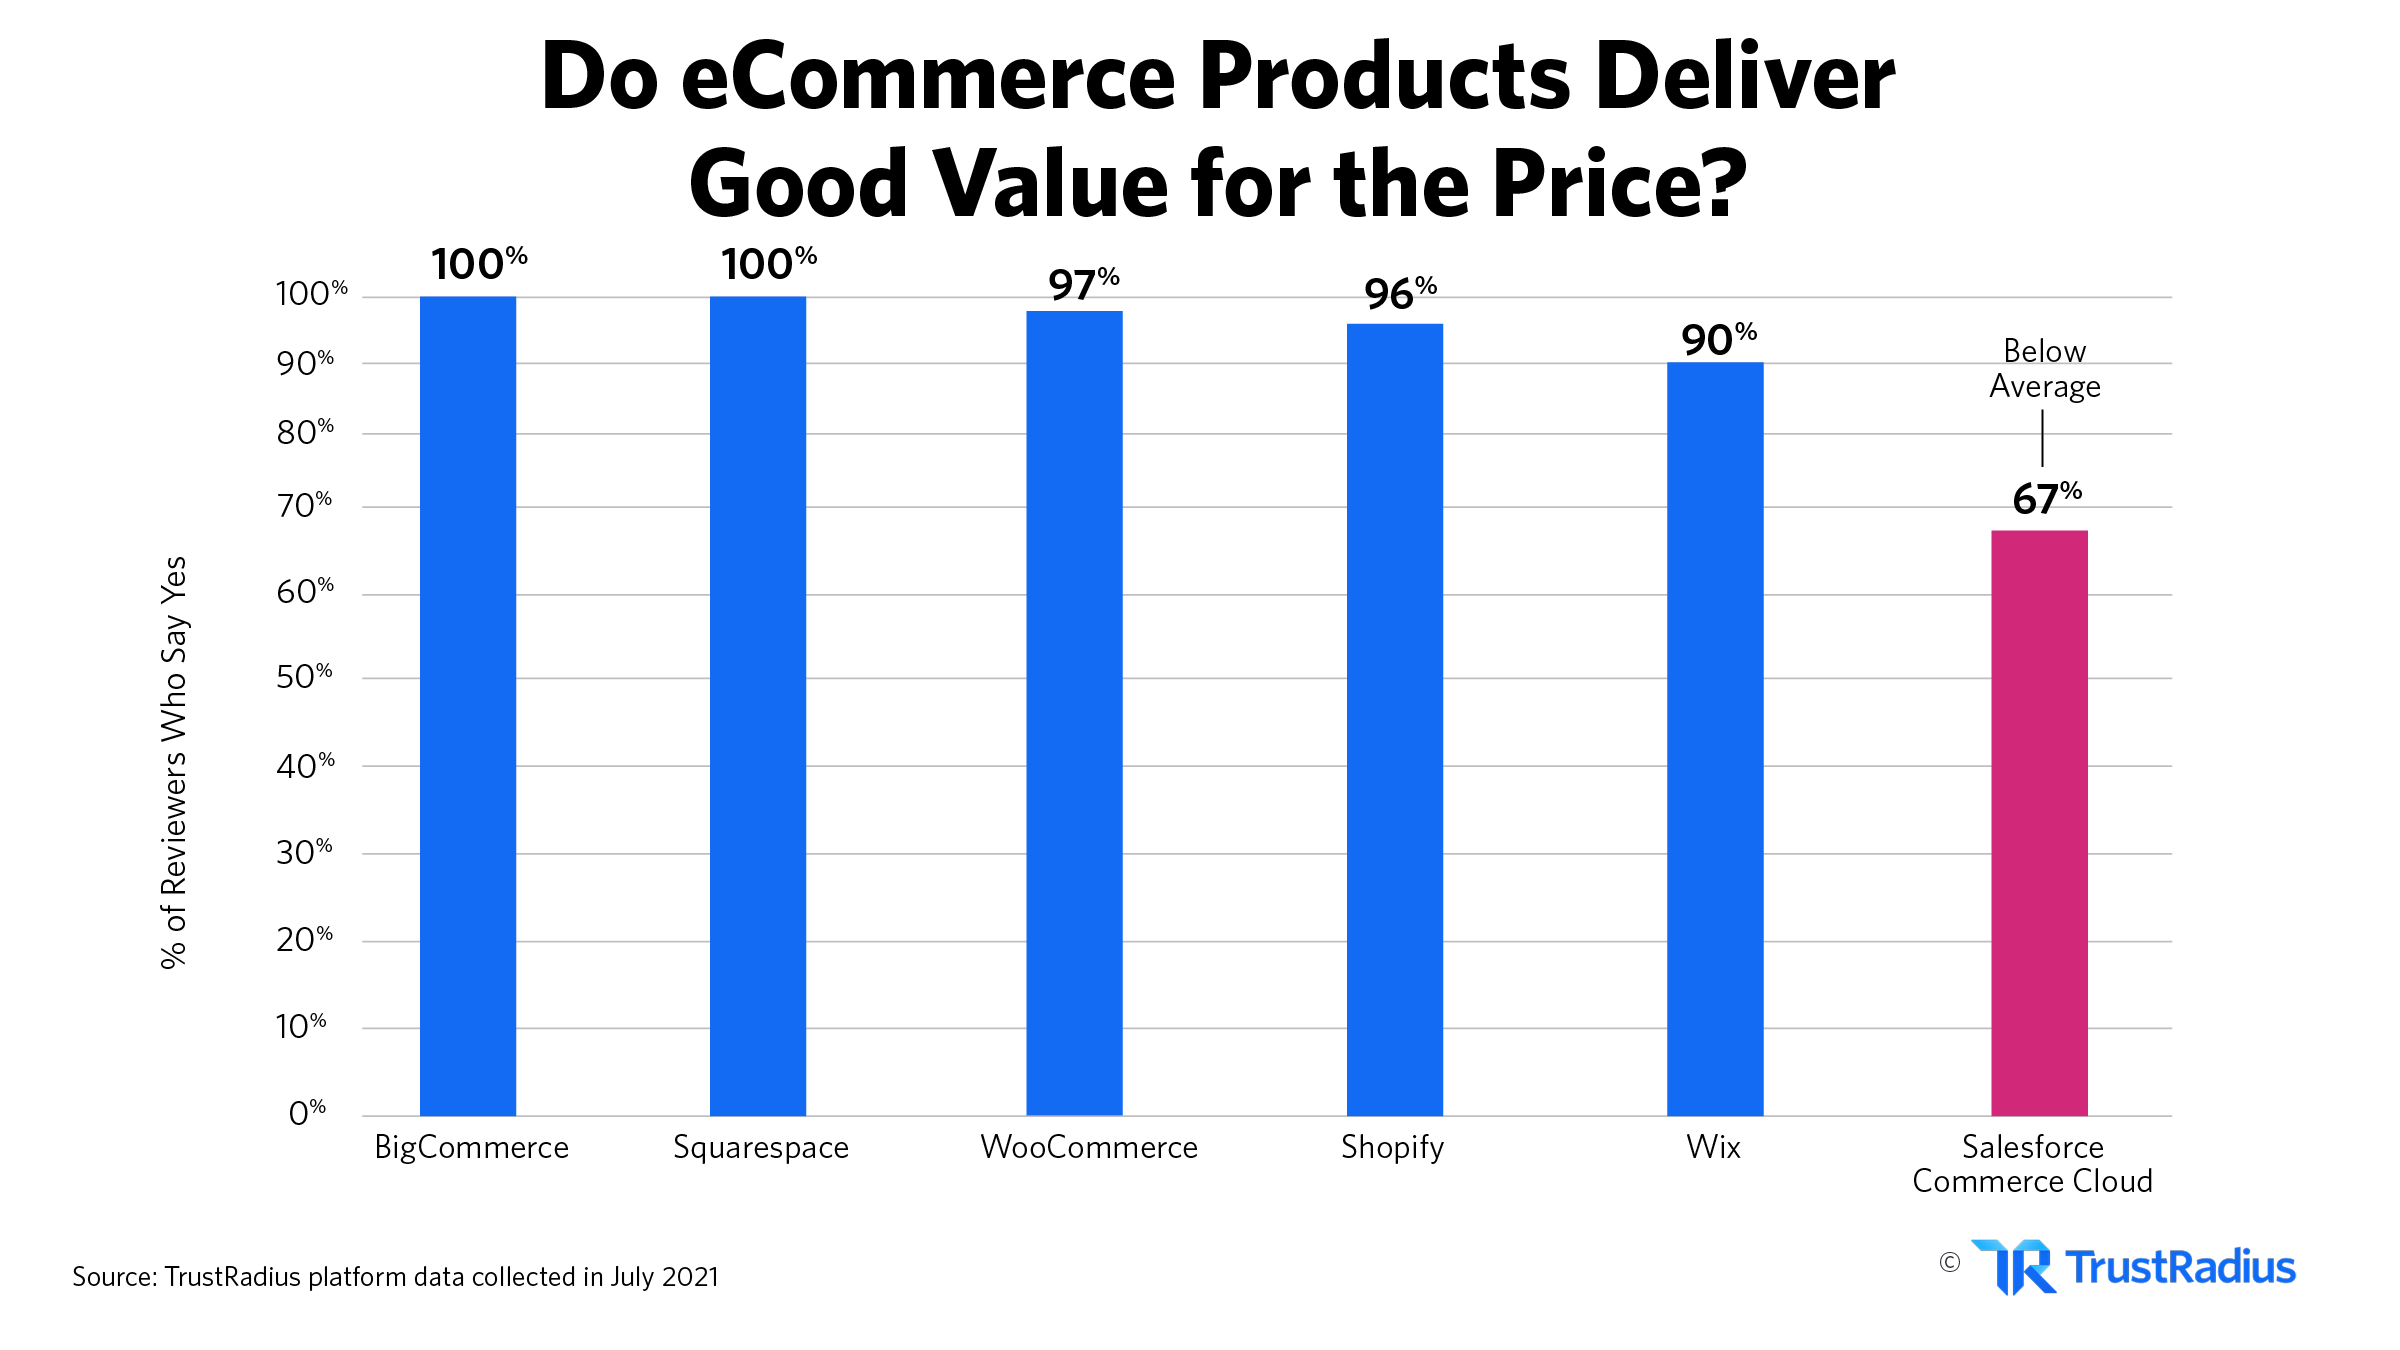 Do ecommerce products deliver good value for price